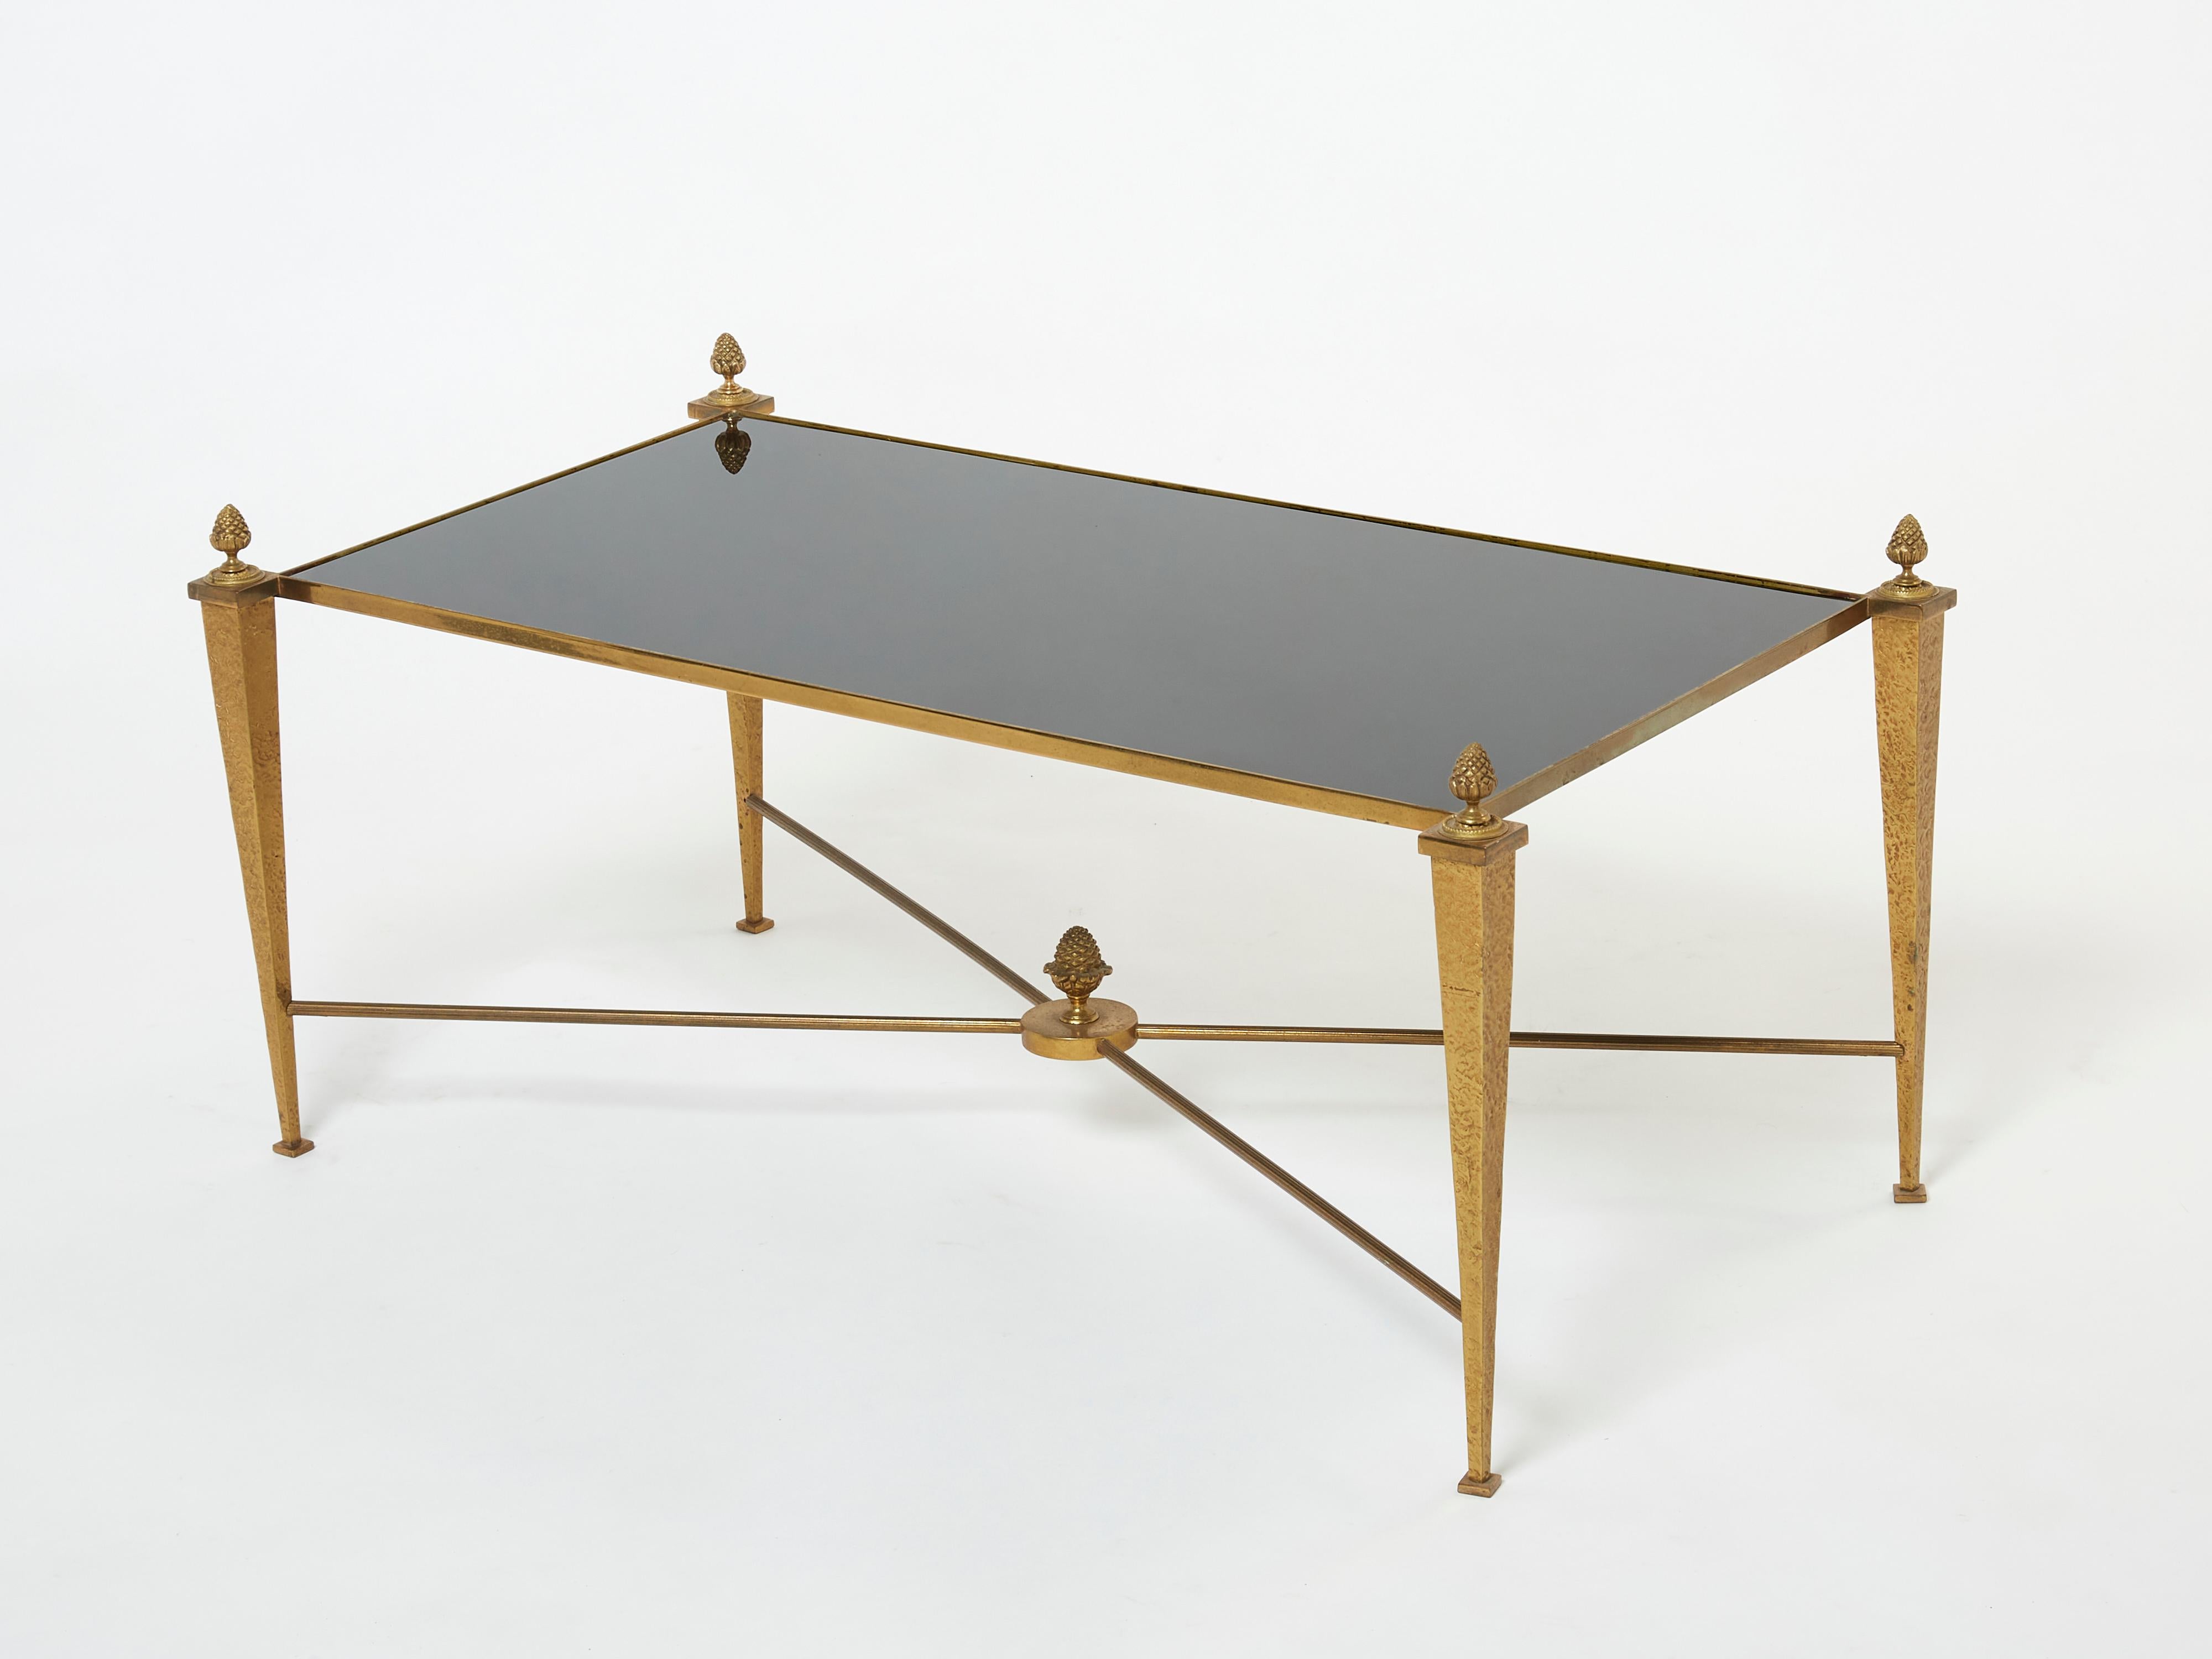 French Maison Ramsay Gilded Wrought Iron Opaline Coffee Table, 1960s For Sale 6